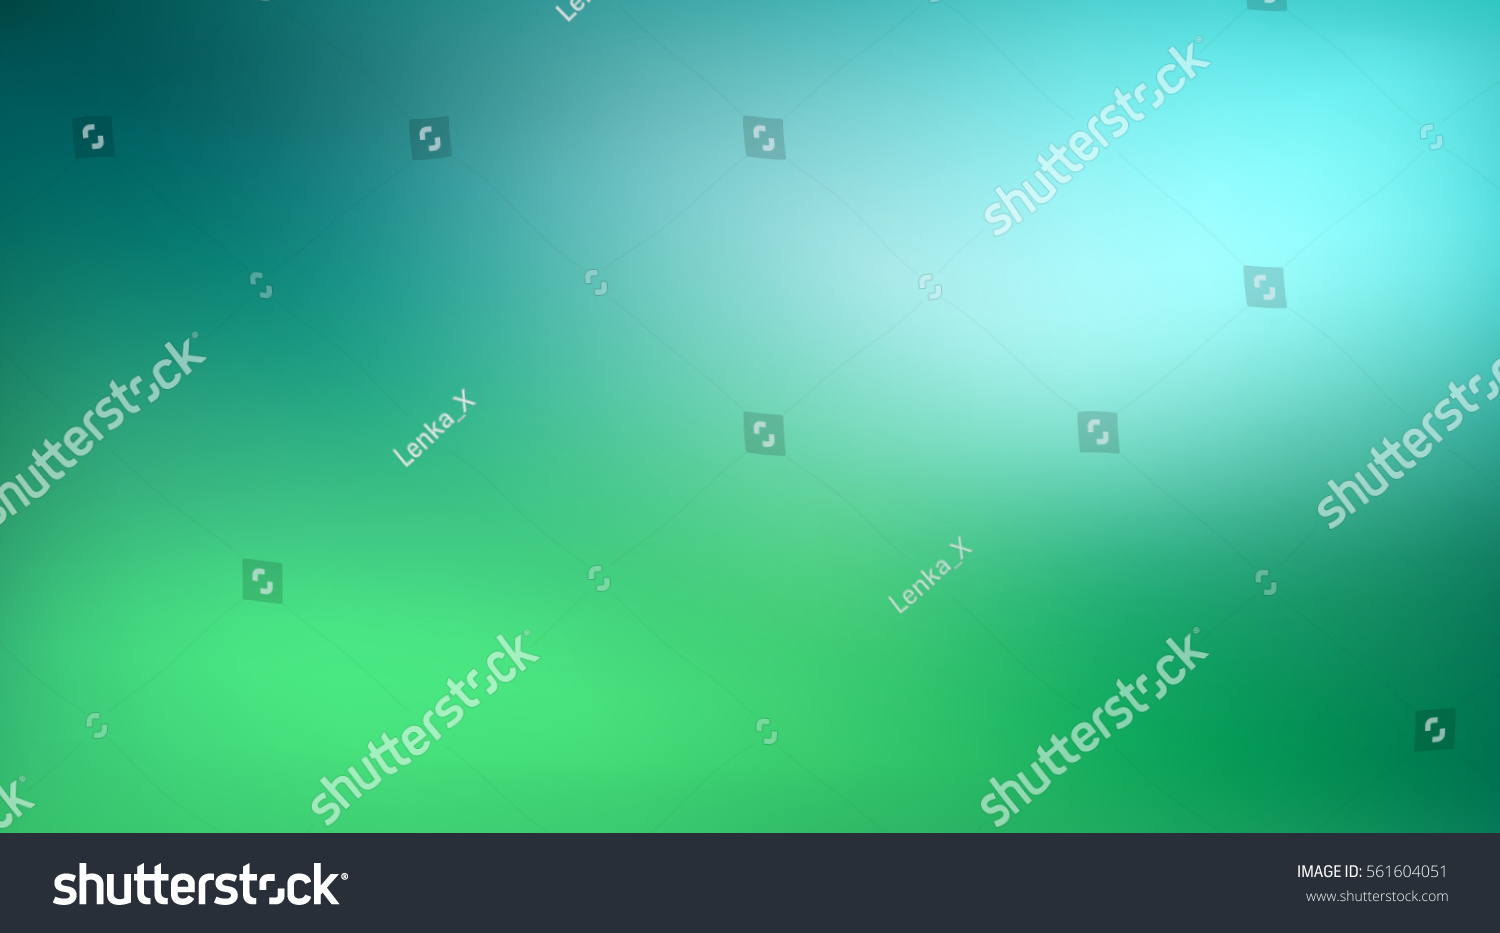 Abstract green and blue blurred gradient background with light. Nature backdrop. Vector illustration. Ecology concept for your graphic design, banner or poster #561604051